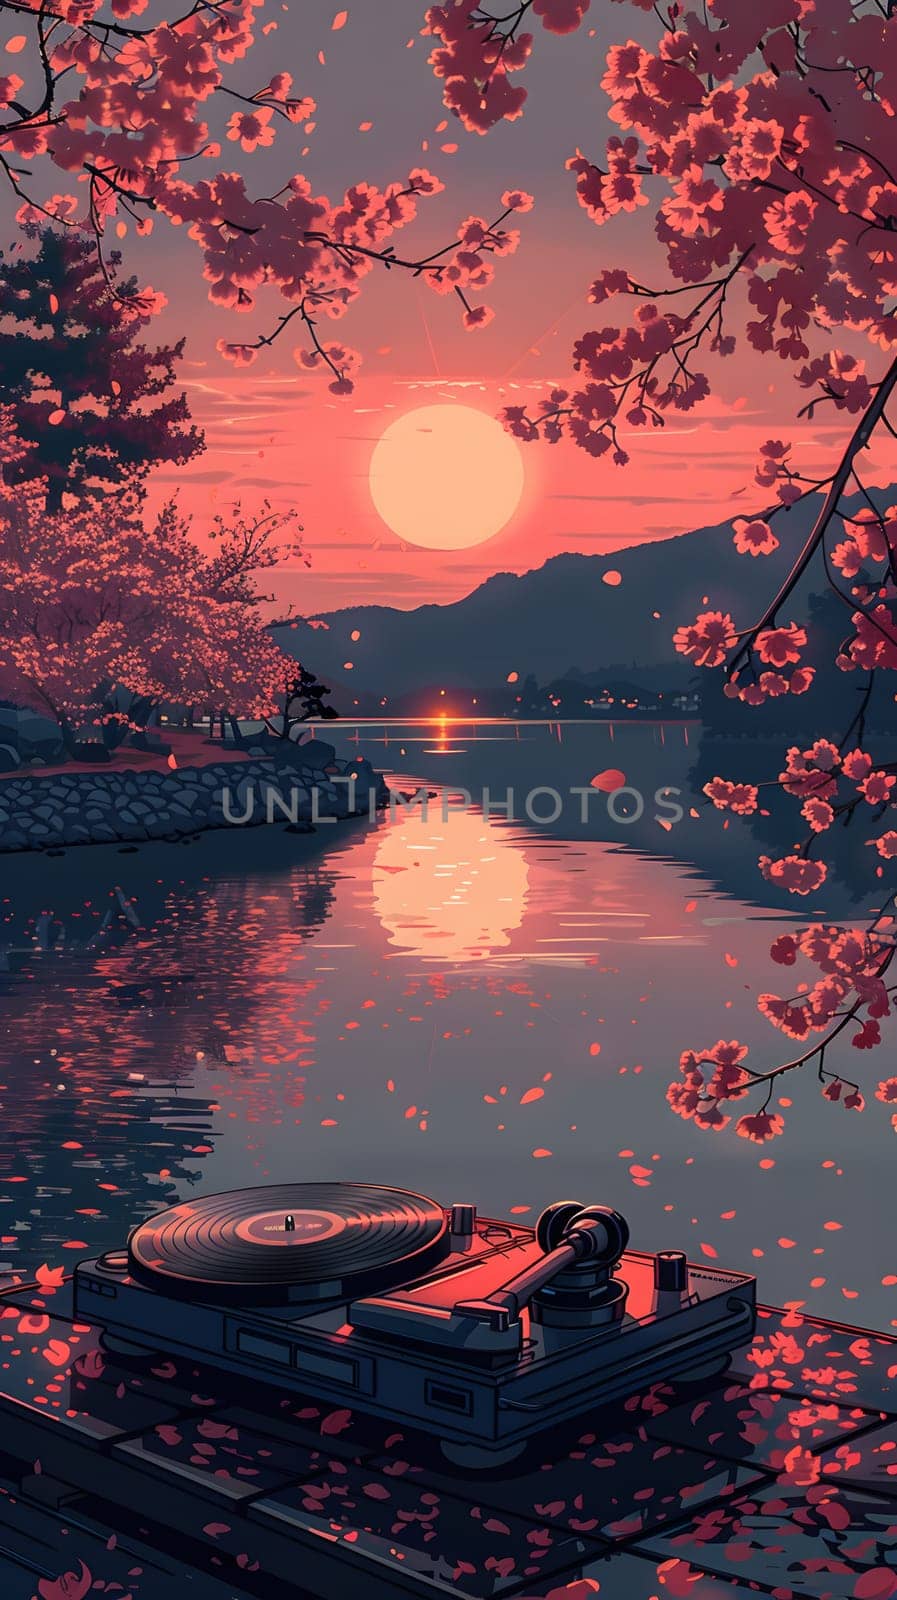 The setting sun casts a warm glow over the tranquil lake, framed by cherry blossom trees. The sky is painted with hues of pink and orange, creating a serene natural landscape at dusk